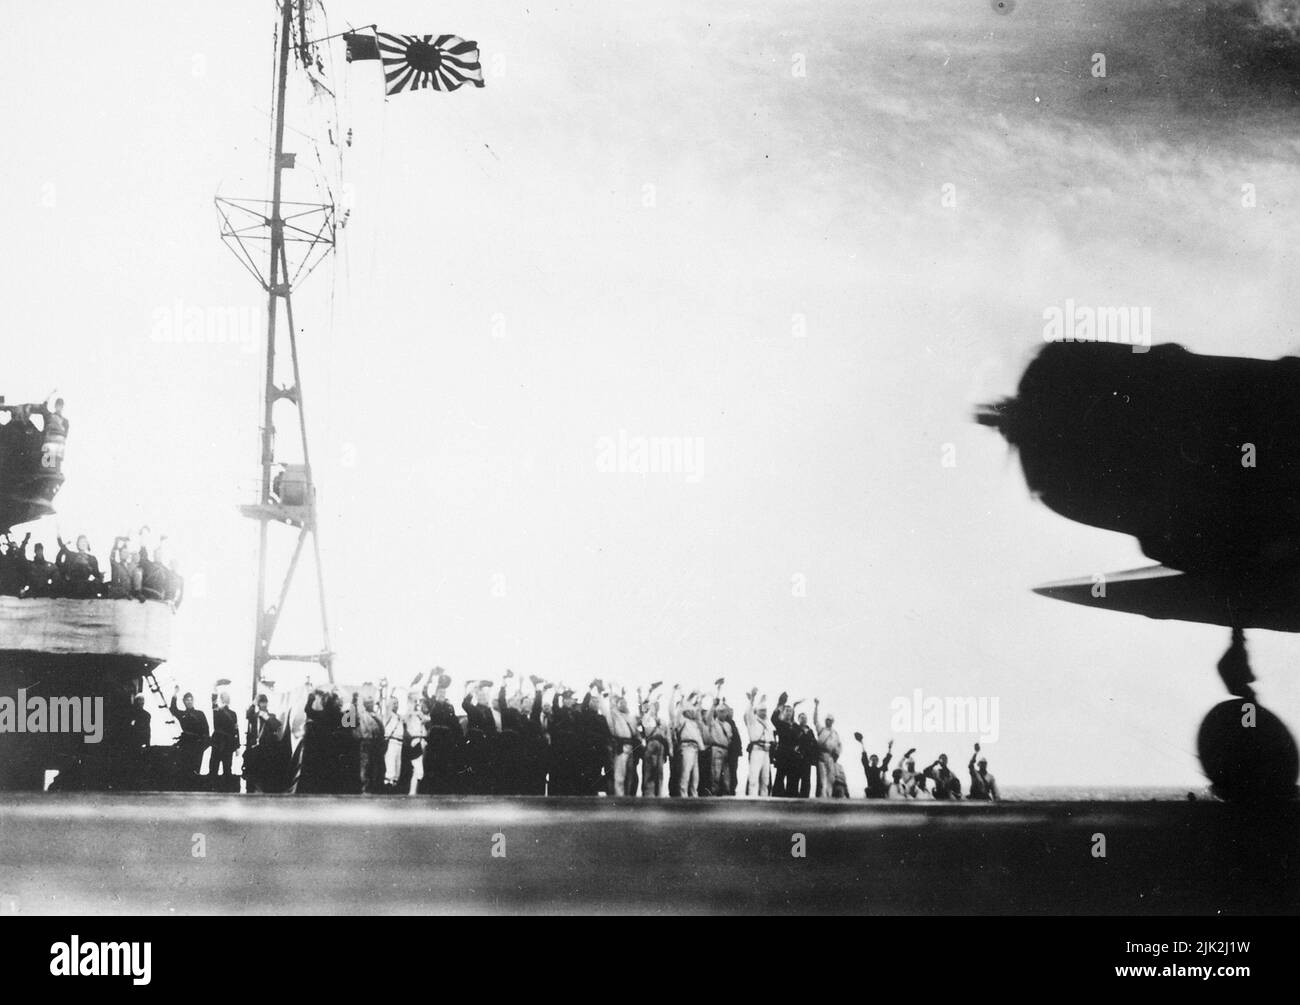 A captured Japanese photograph taken aboard a Japanese carrier before the attack on Pearl Harbor, December 7, 1941. It shows the men raising their arms in salute with the silhouette of a plane and the Rising Sun flag. The propellor on the plane is turning, so this image was possibly taken as the planes were leaving in their famous and infamous mission. Stock Photo